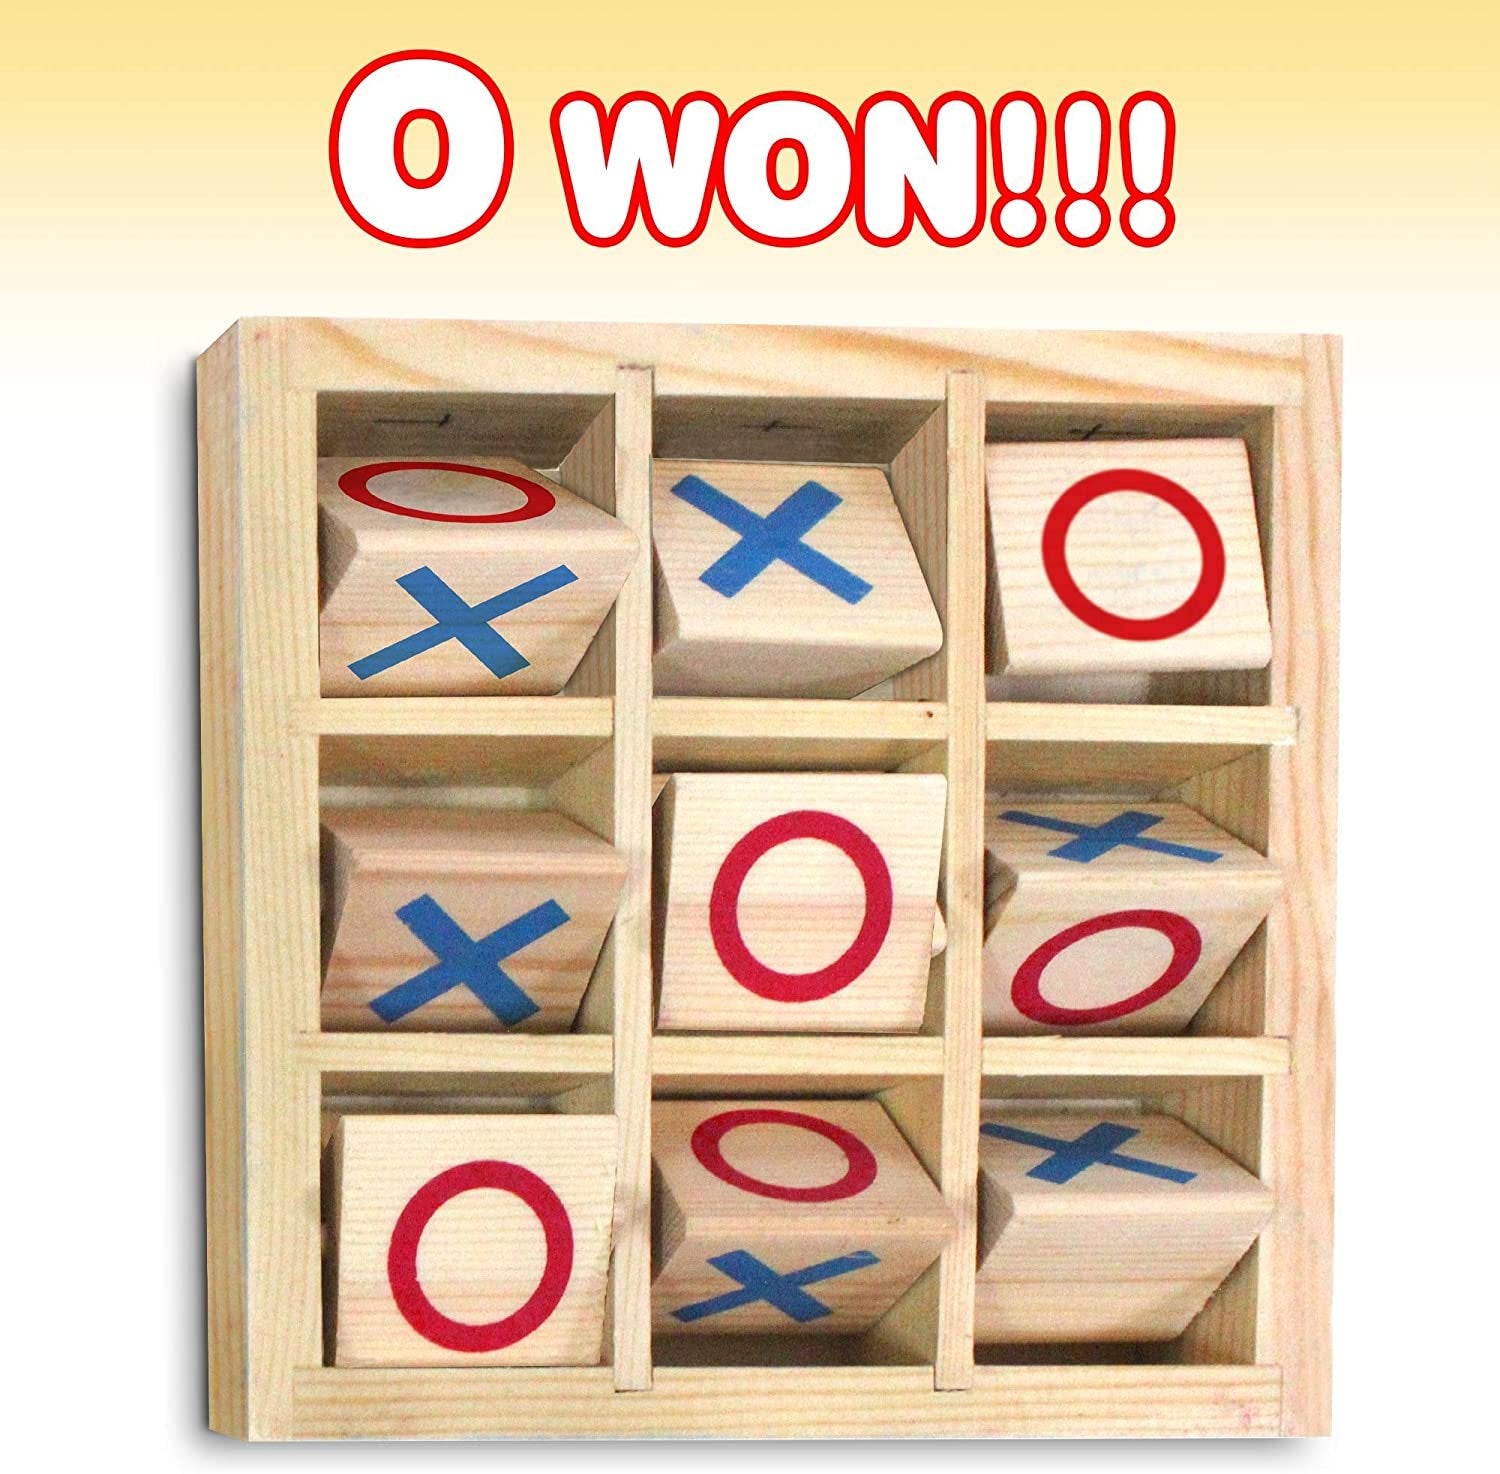 Gamie Wooden Tic-Tac-Toe Game, Small Travel Game with Fixed Spinning Pieces, Classic Wood Game for Kids, Fun Indoor Game Night Activity for Boys and Girls